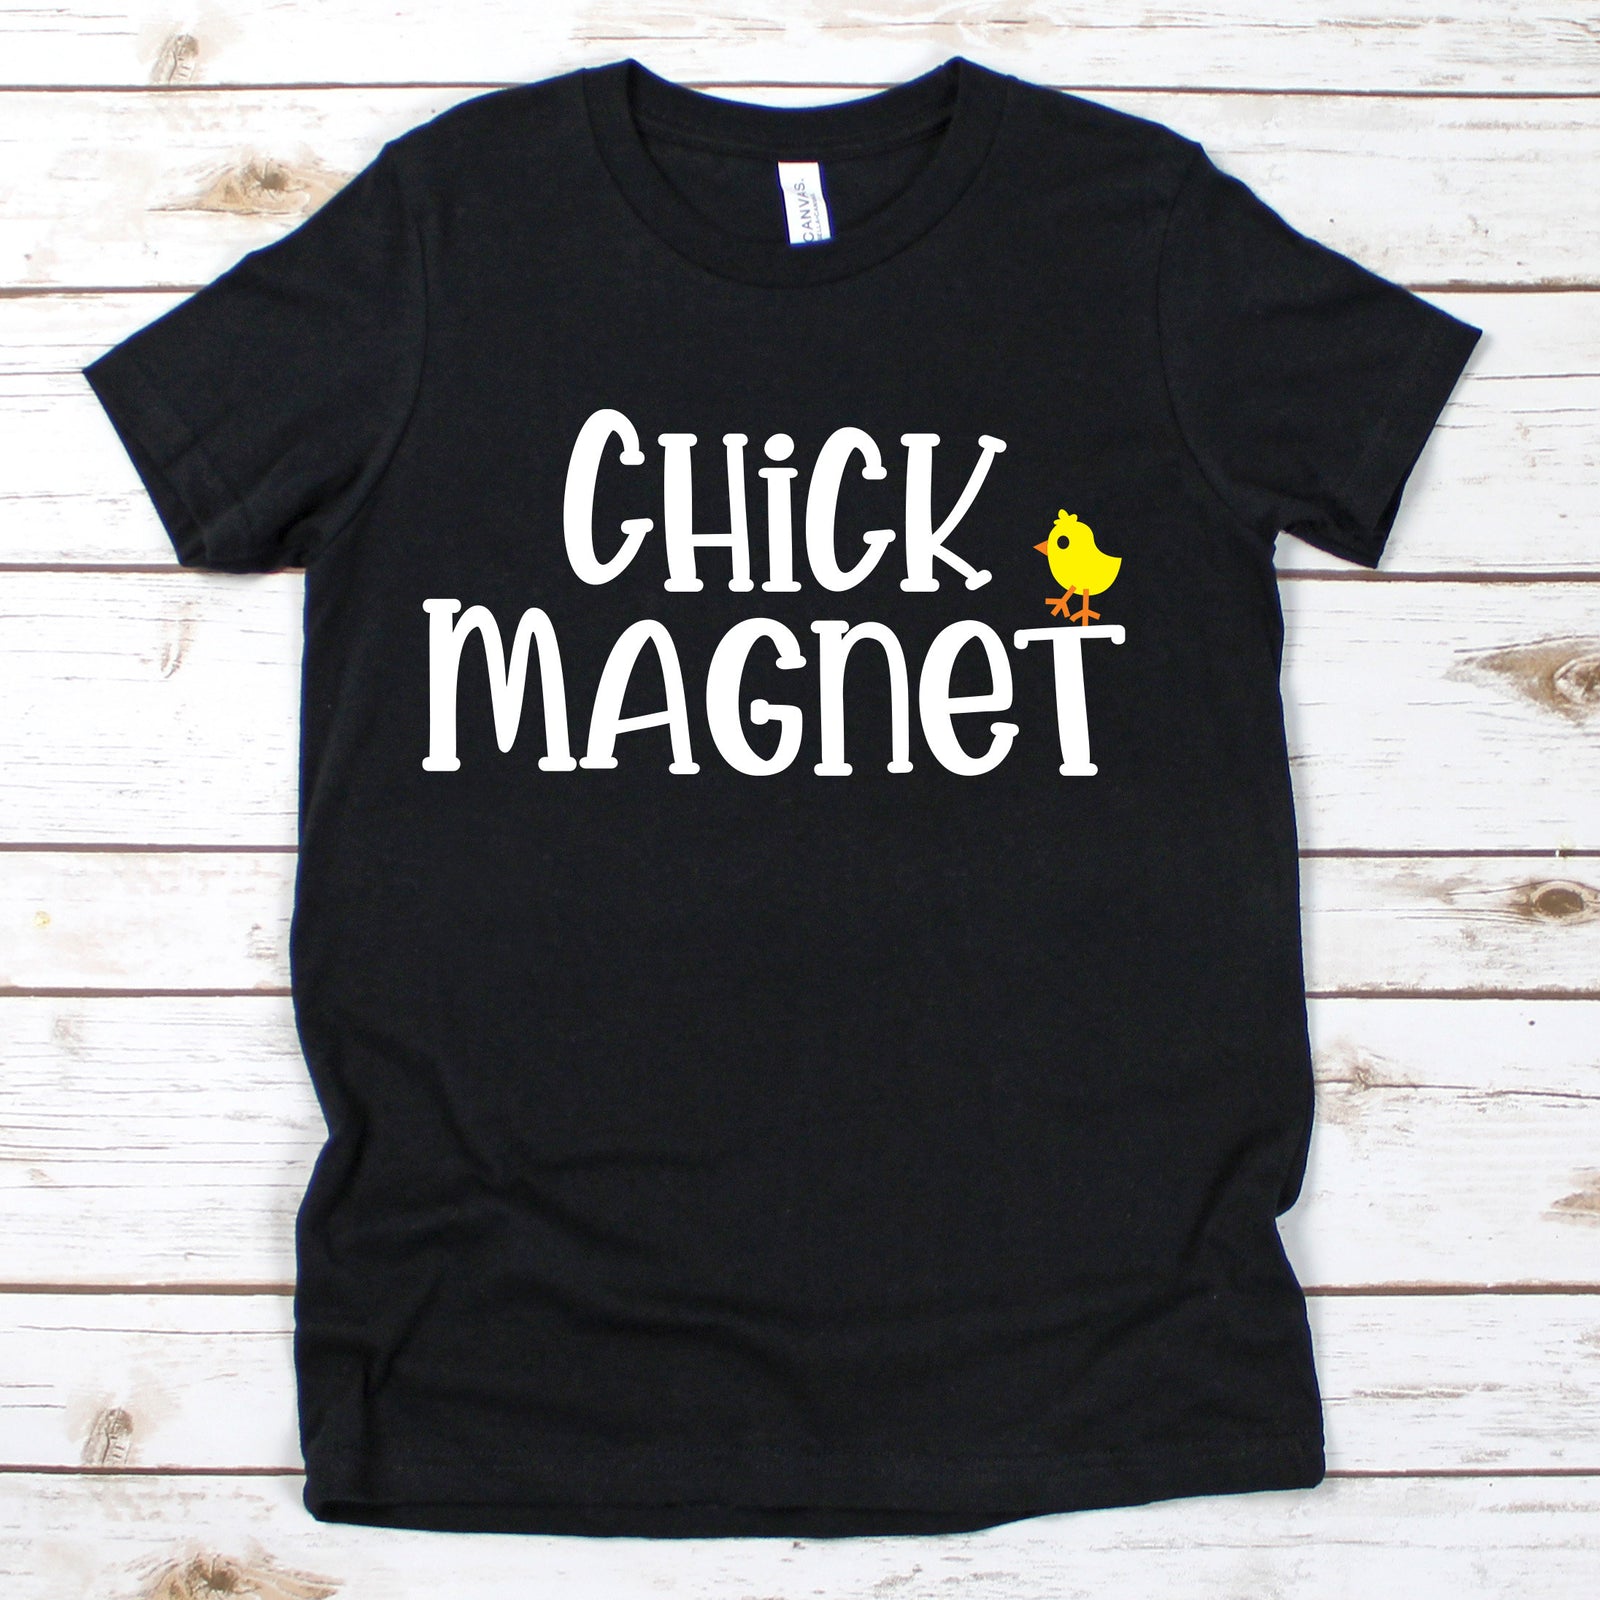 Chick Magnet Shirt - Kids Easter Shirt - Cute Yellow Chick- Gift for God Son